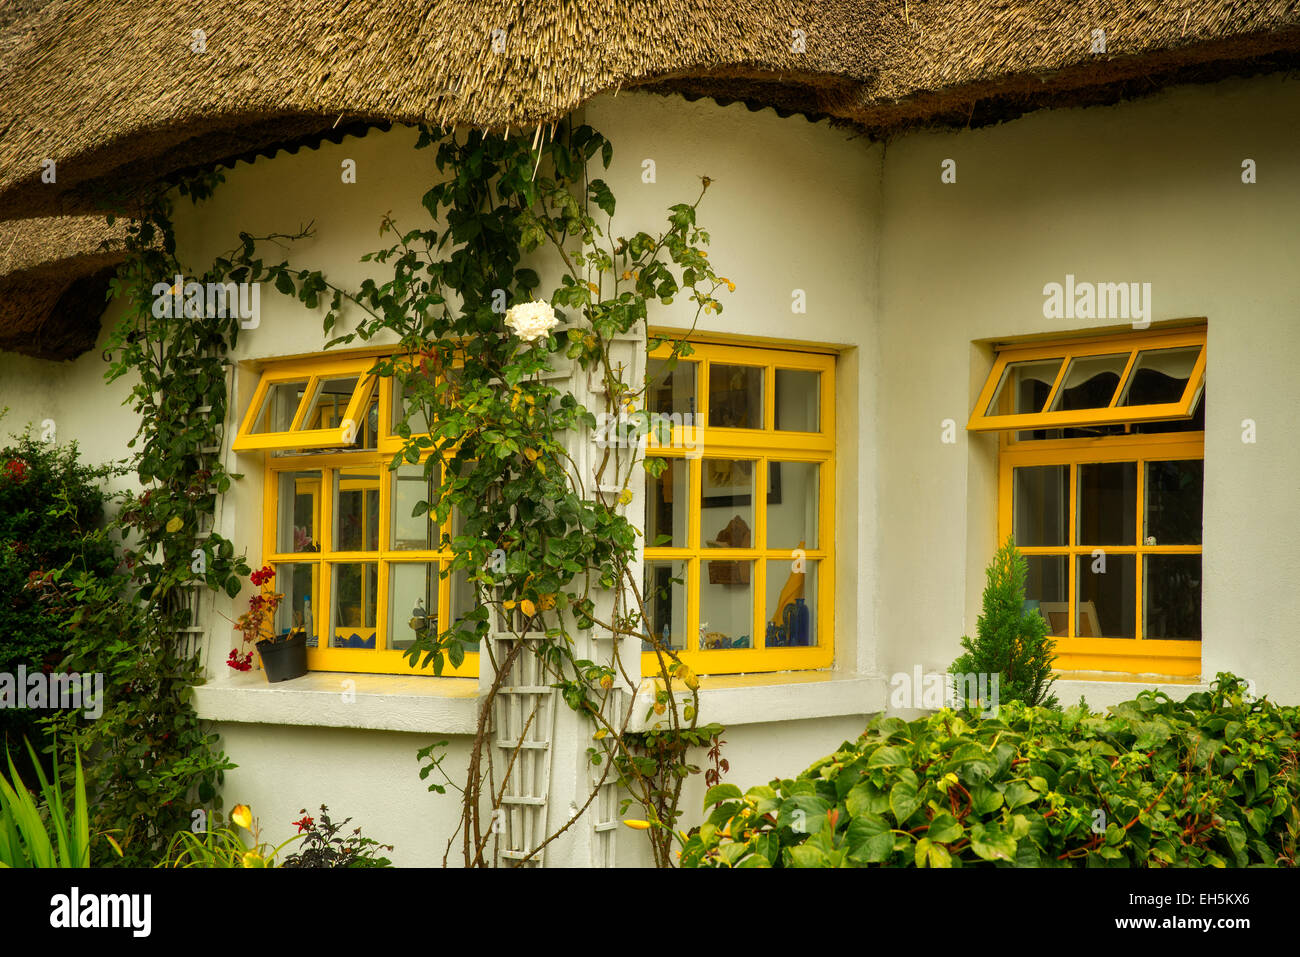 Thatched cotages in Adare, Ireland. Stock Photo